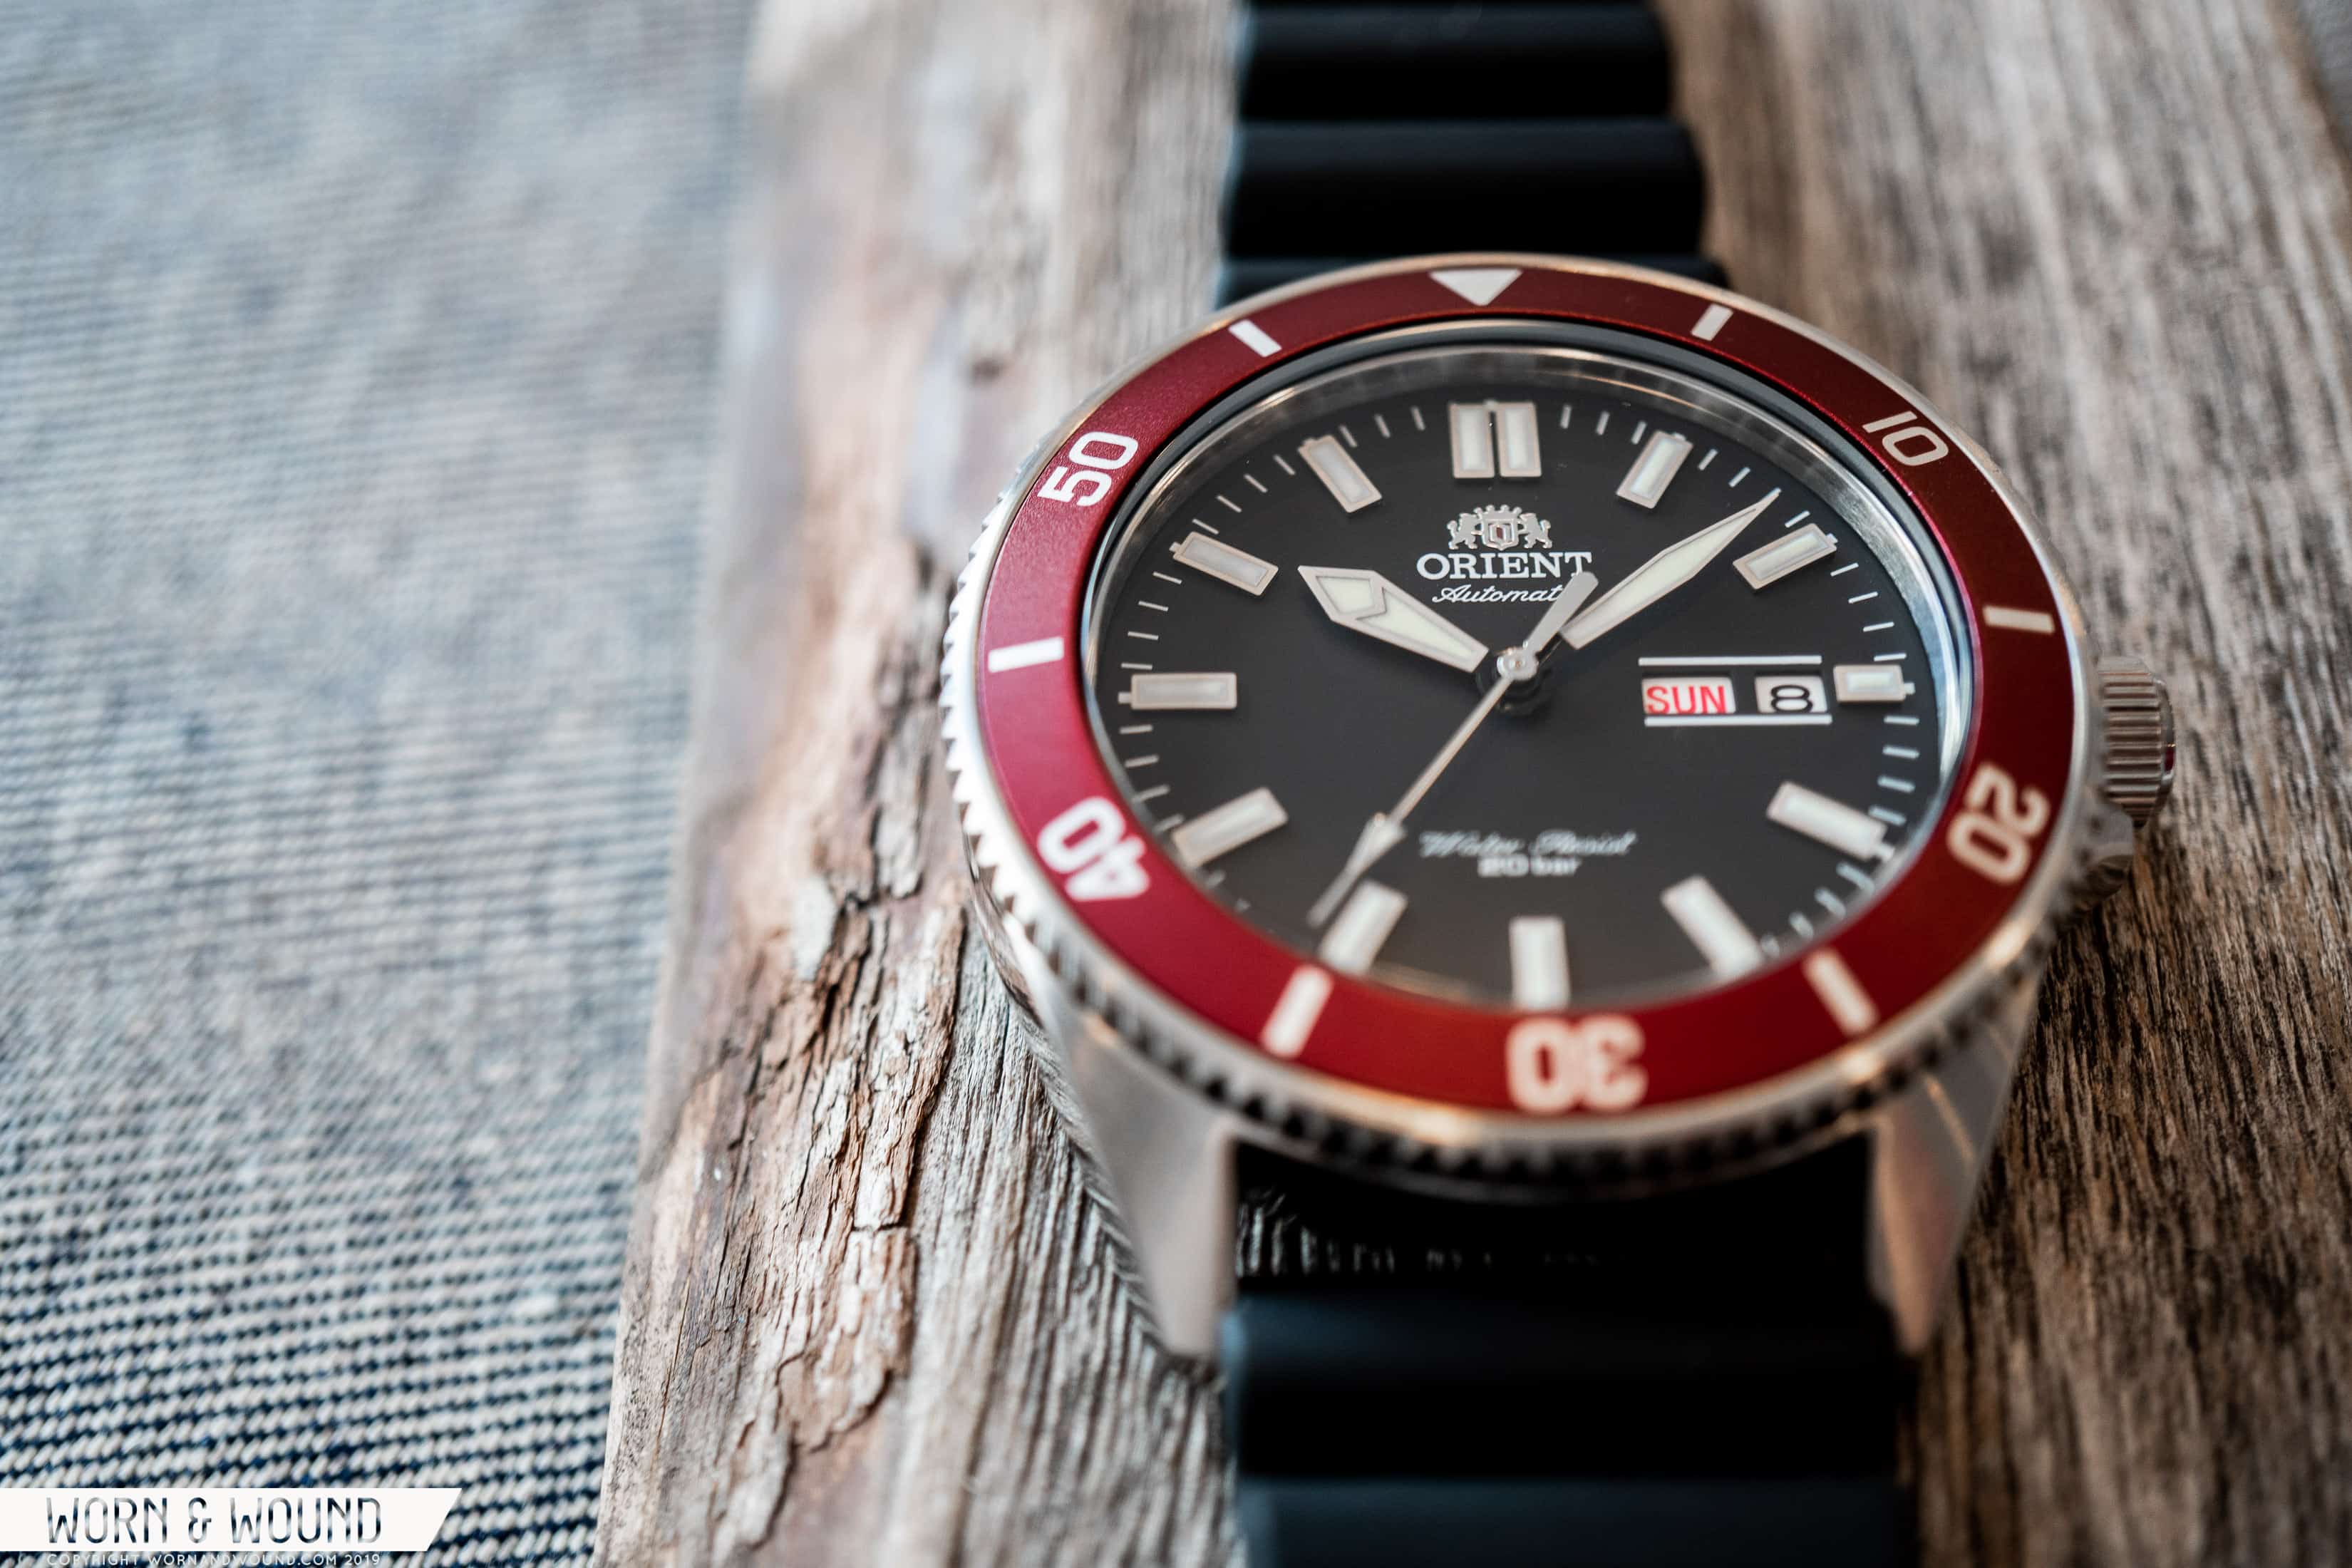 First Look at Orient Kano, the Japanese Latest Value-Packed Diver Worn & Wound